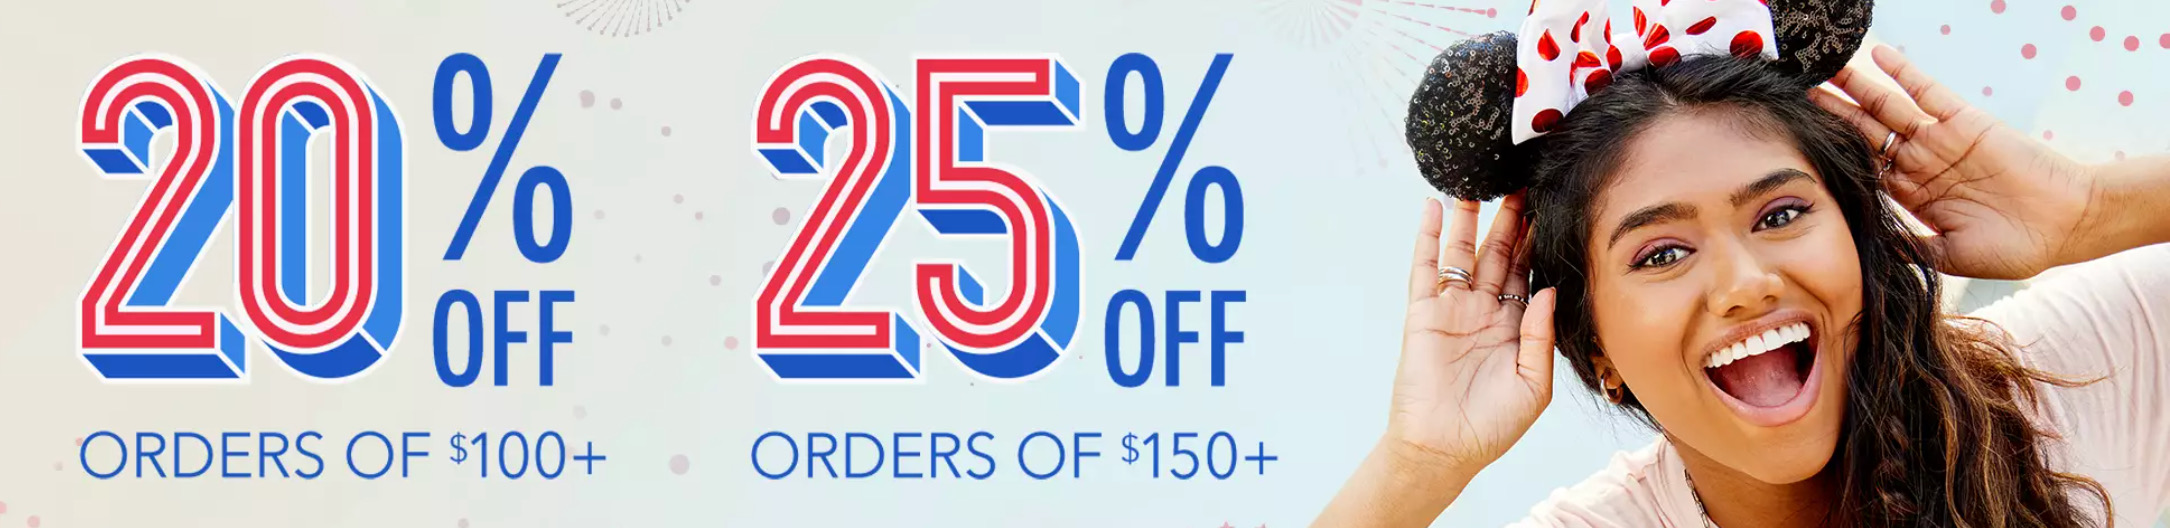 shopDisney: 20% Off $100+, 25% Off $150+, Free Shipping on $75+